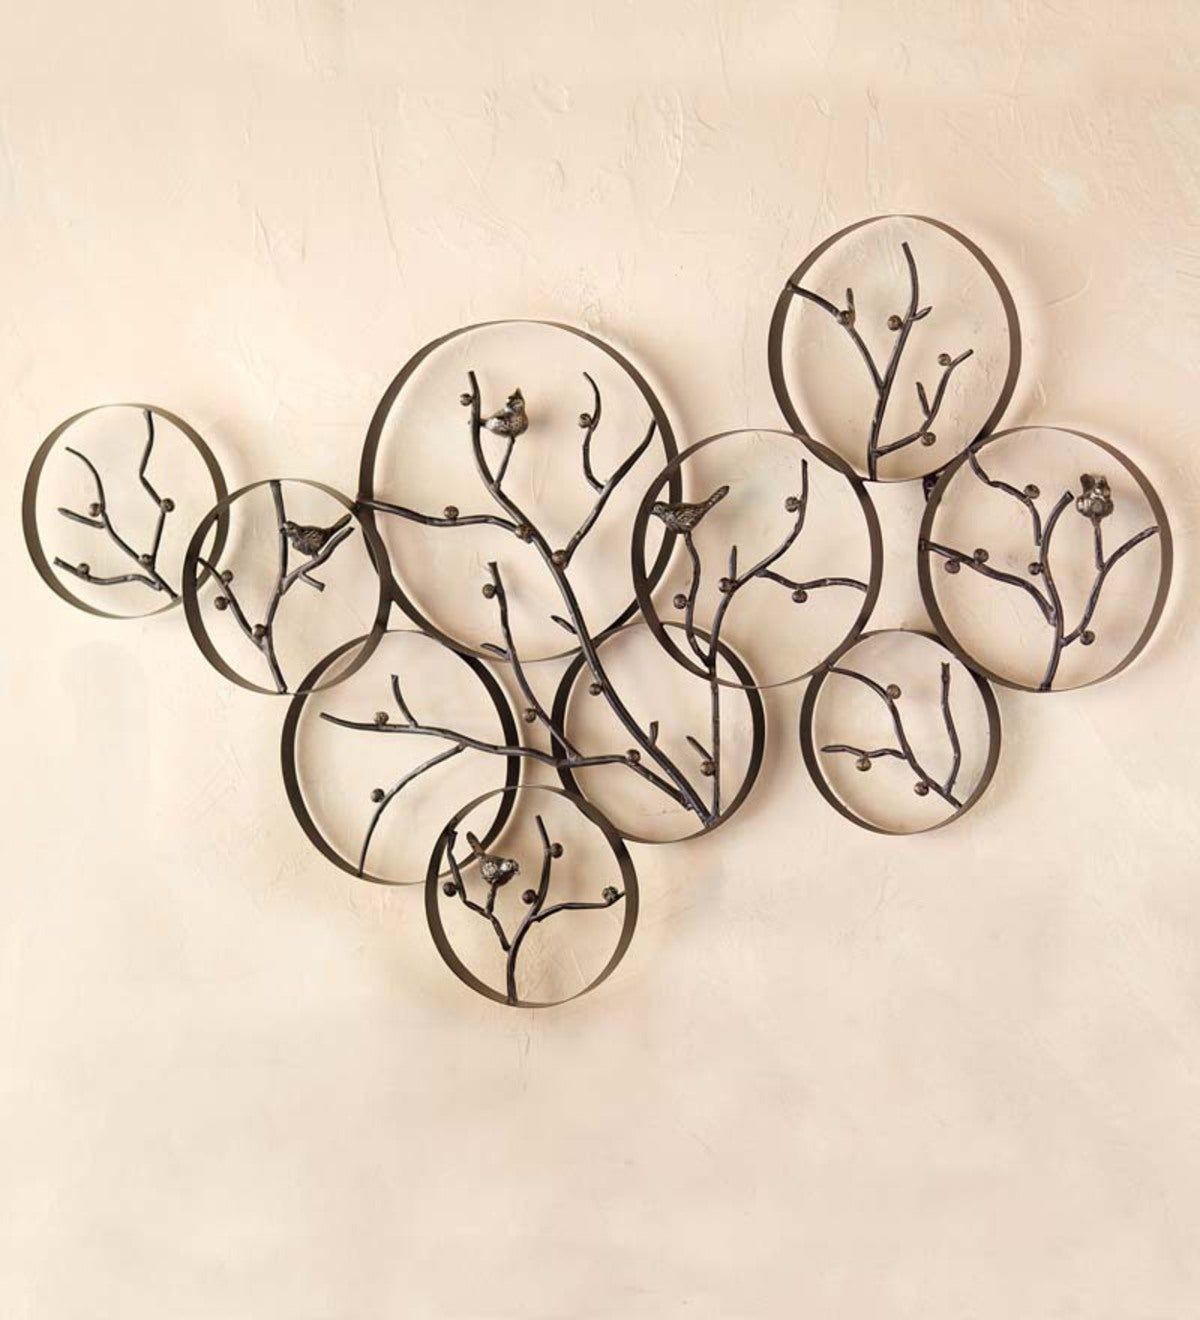 Metal Bird And Branch Wall Art | Plowhearth With Metal Bird Wall Art (View 13 of 15)